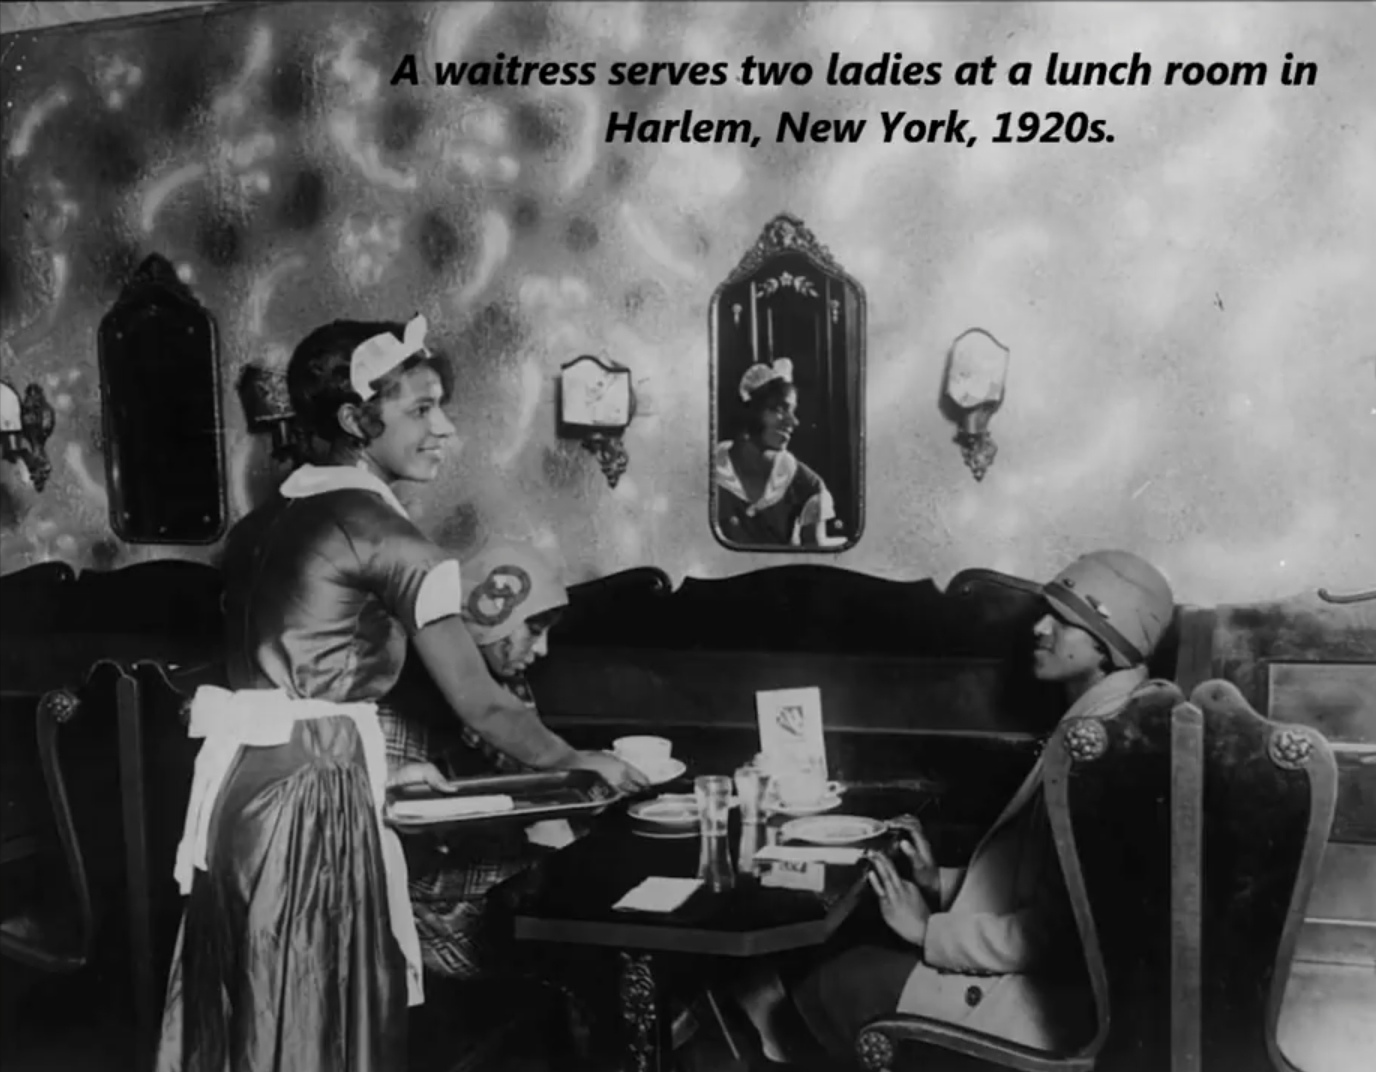 waiter 1920 - A waitress serves two ladies at a lunch room in Harlem, New York, 1920s.